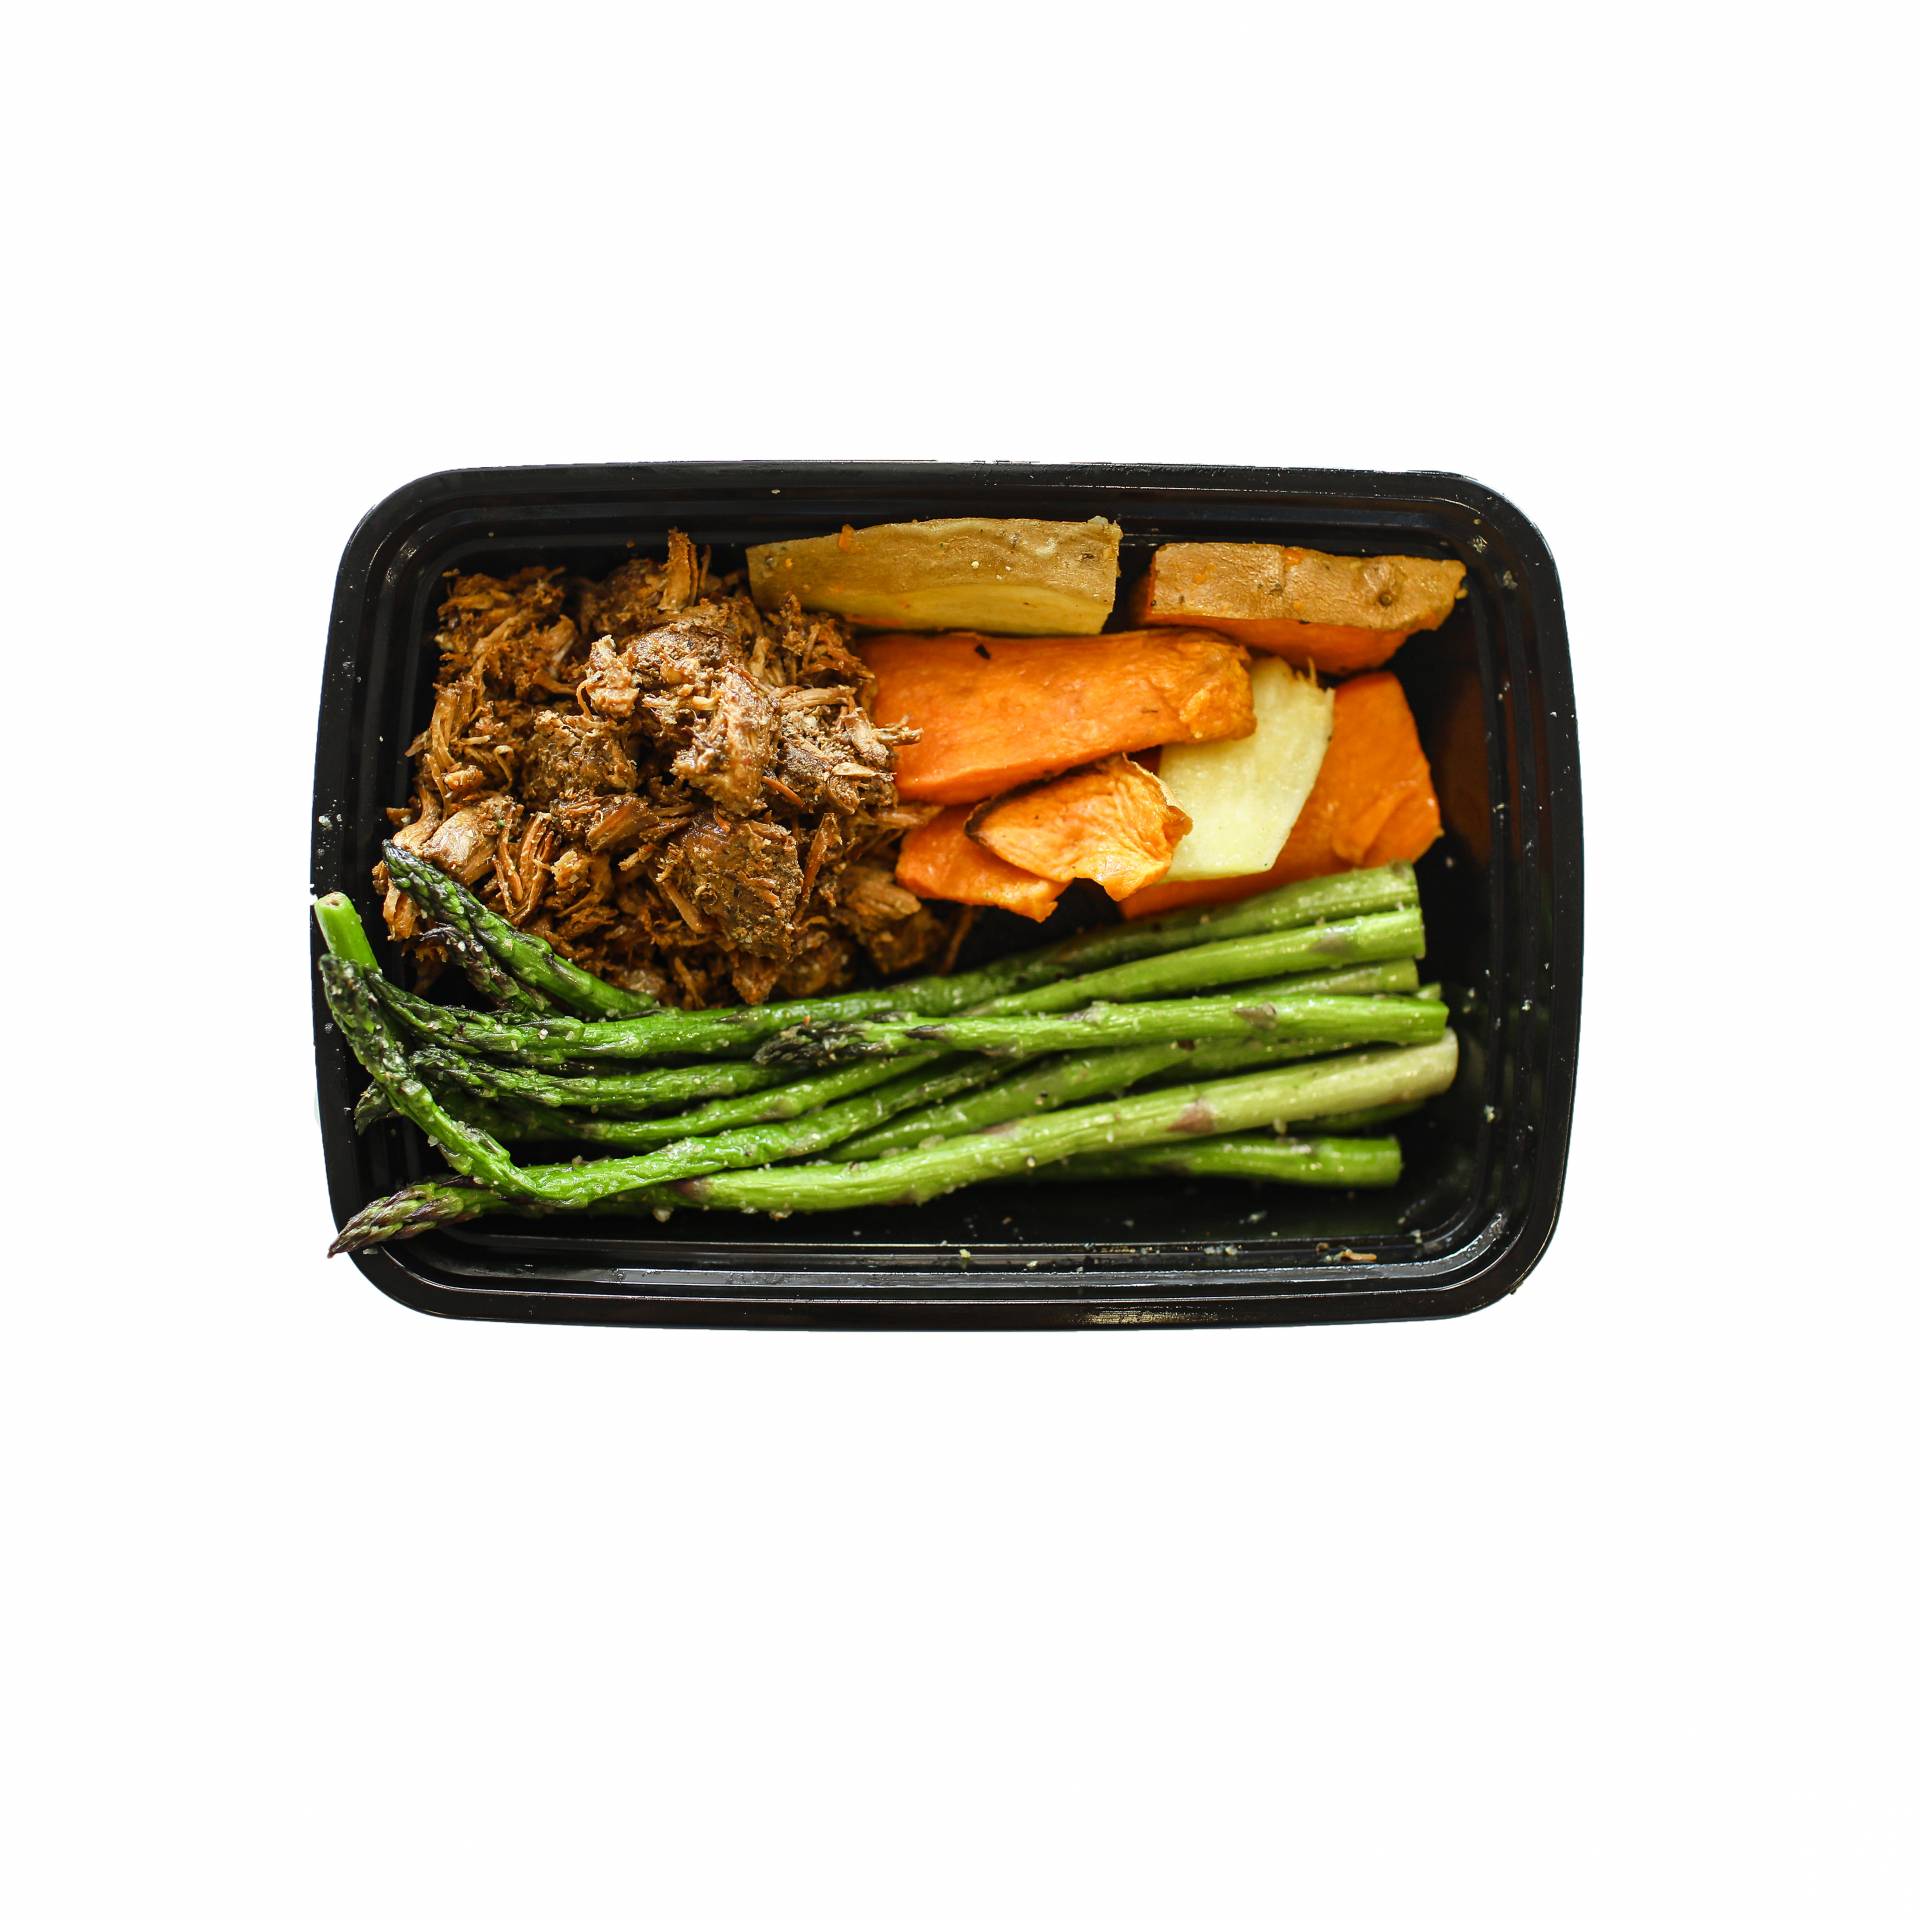 Slow-Cooked Pork with Sweet Potatoes & Asparagus